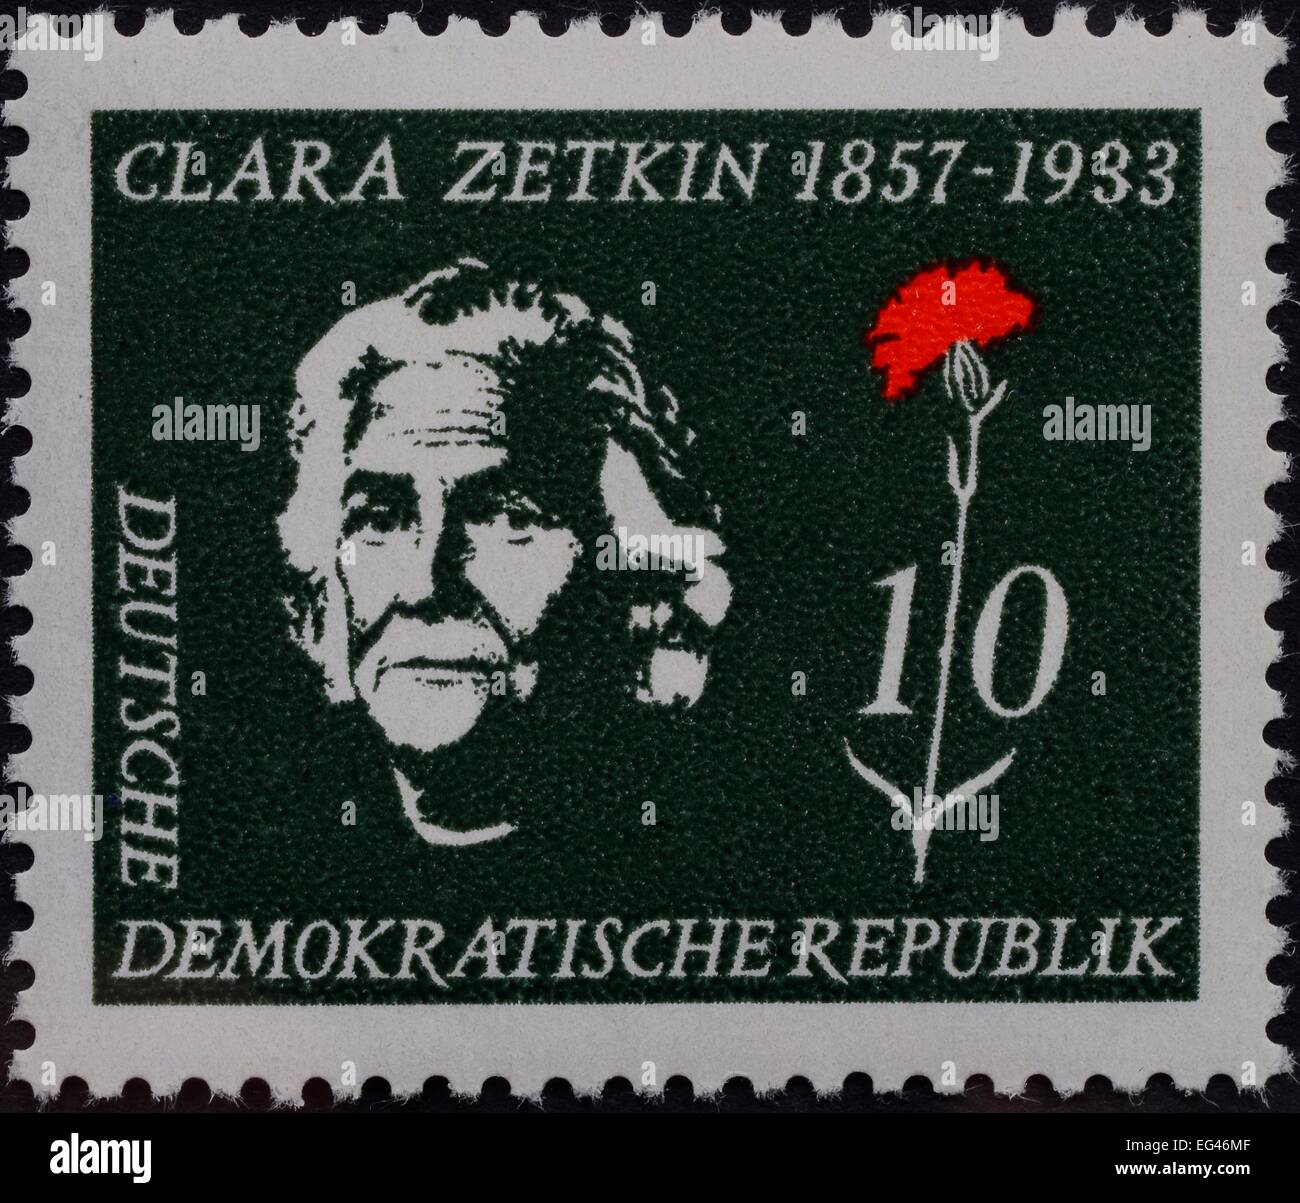 CRMara Zetkin, a German Marxist theorist, activist, and advocate for women's rights, 1911, portrait on a stamp, GDR, 1957 Stock Photo